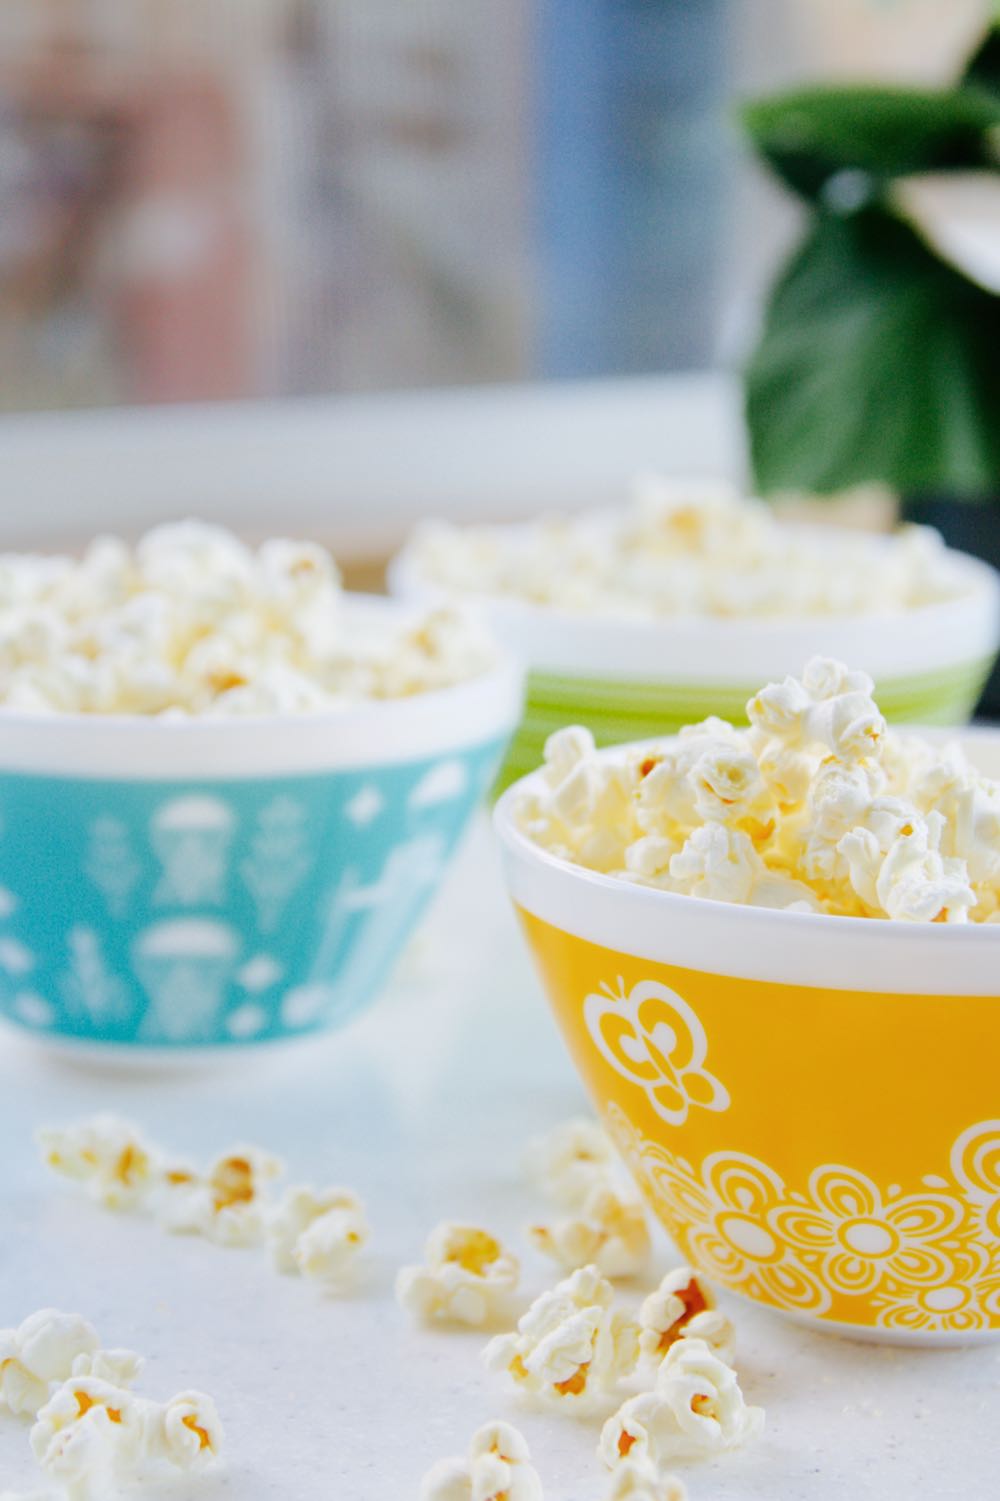 How to make homemade microwave popcorn with no oil